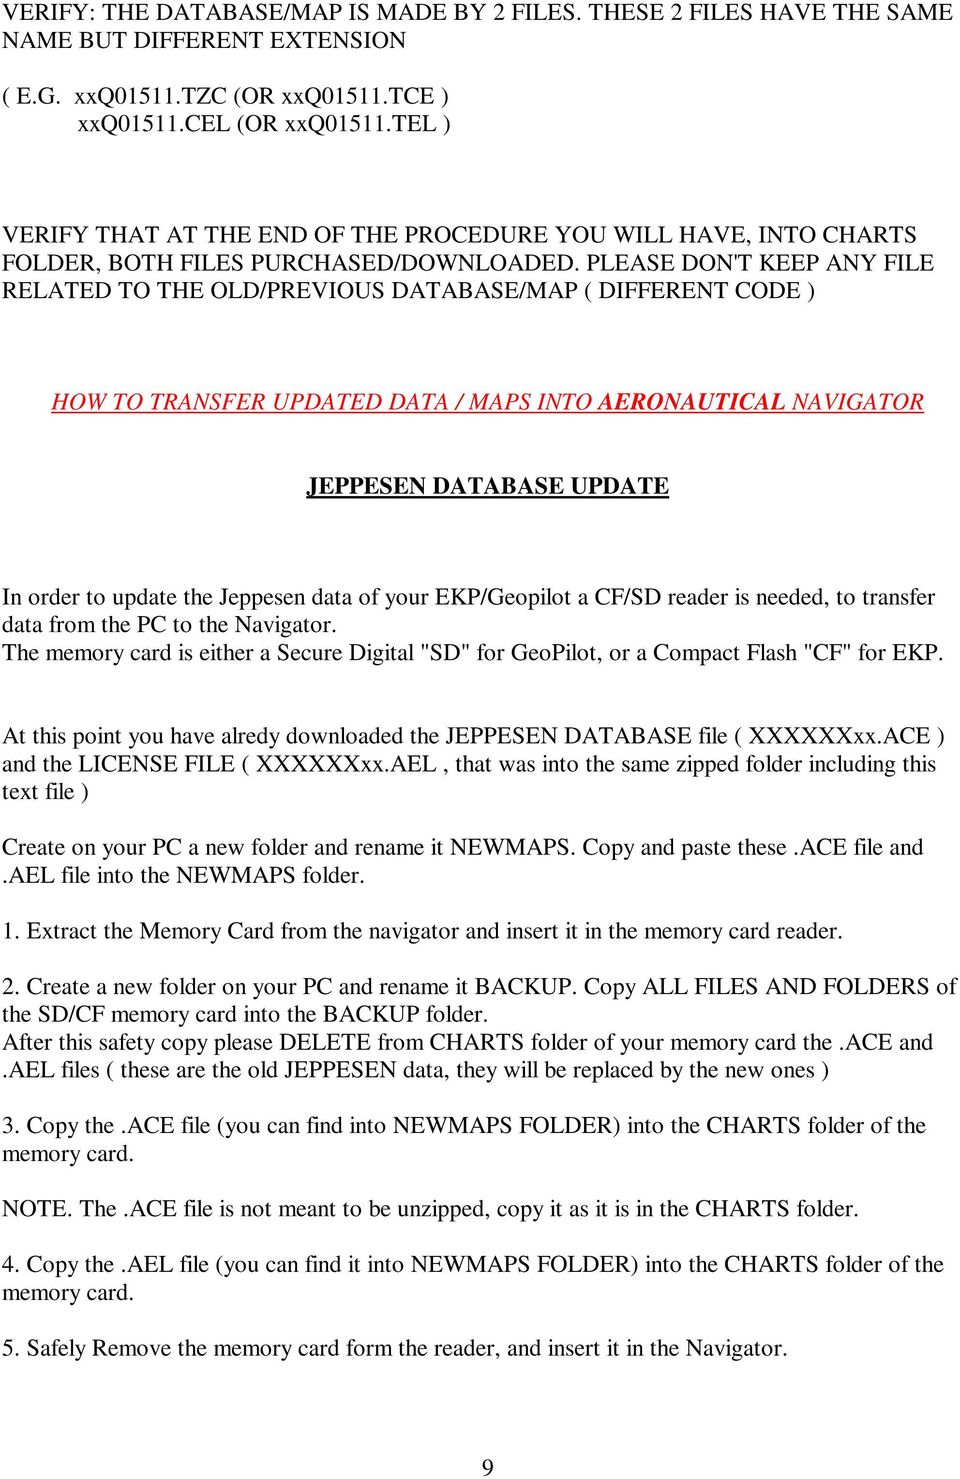 PLEASE DON'T KEEP ANY FILE RELATED TO THE OLD/PREVIOUS DATABASE/MAP ( DIFFERENT CODE ) HOW TO TRANSFER UPDATED DATA / MAPS INTO AERONAUTICAL NAVIGATOR JEPPESEN DATABASE UPDATE In order to update the